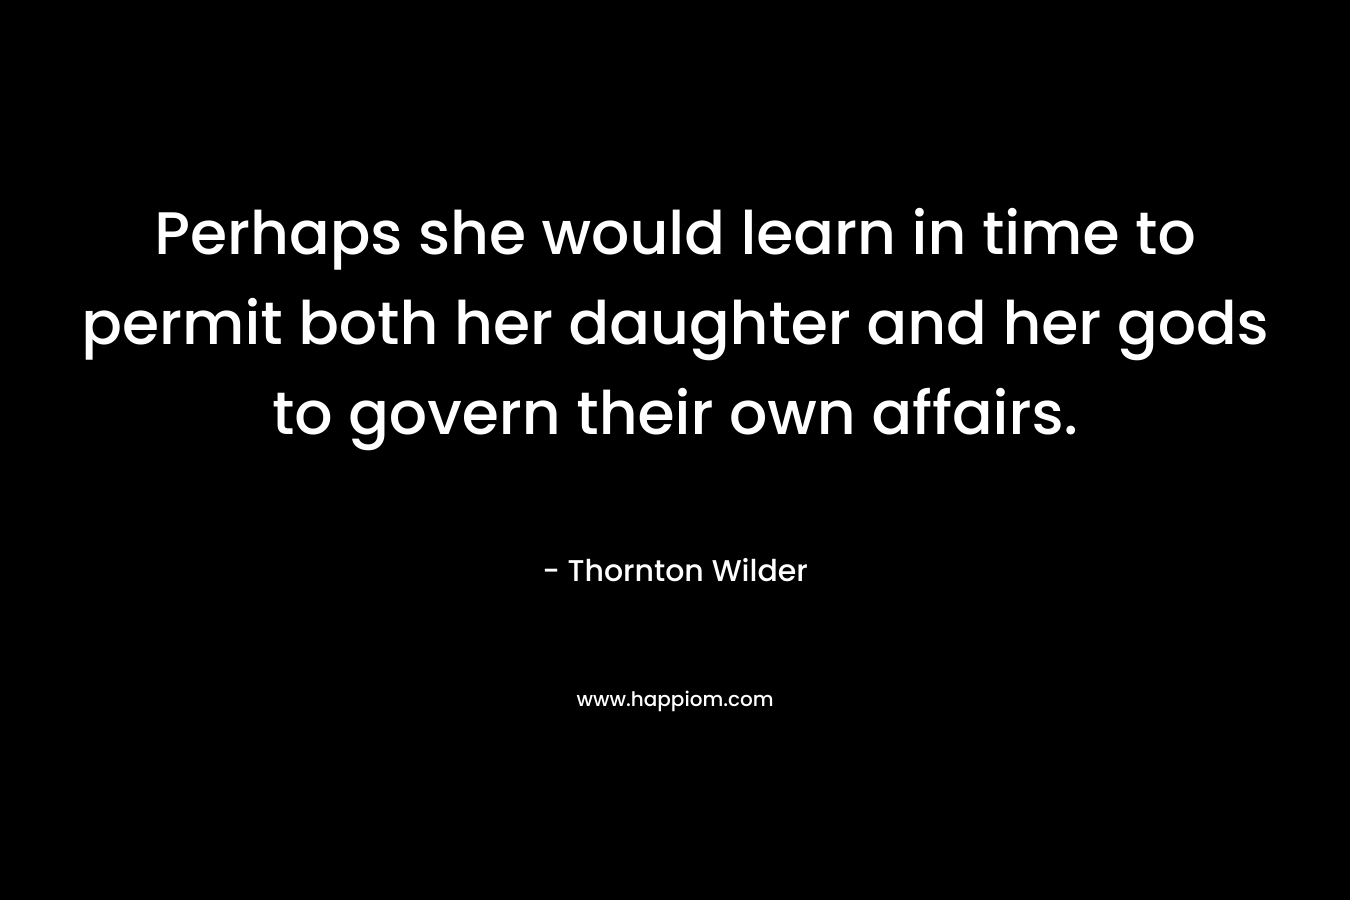 Perhaps she would learn in time to permit both her daughter and her gods to govern their own affairs. – Thornton Wilder